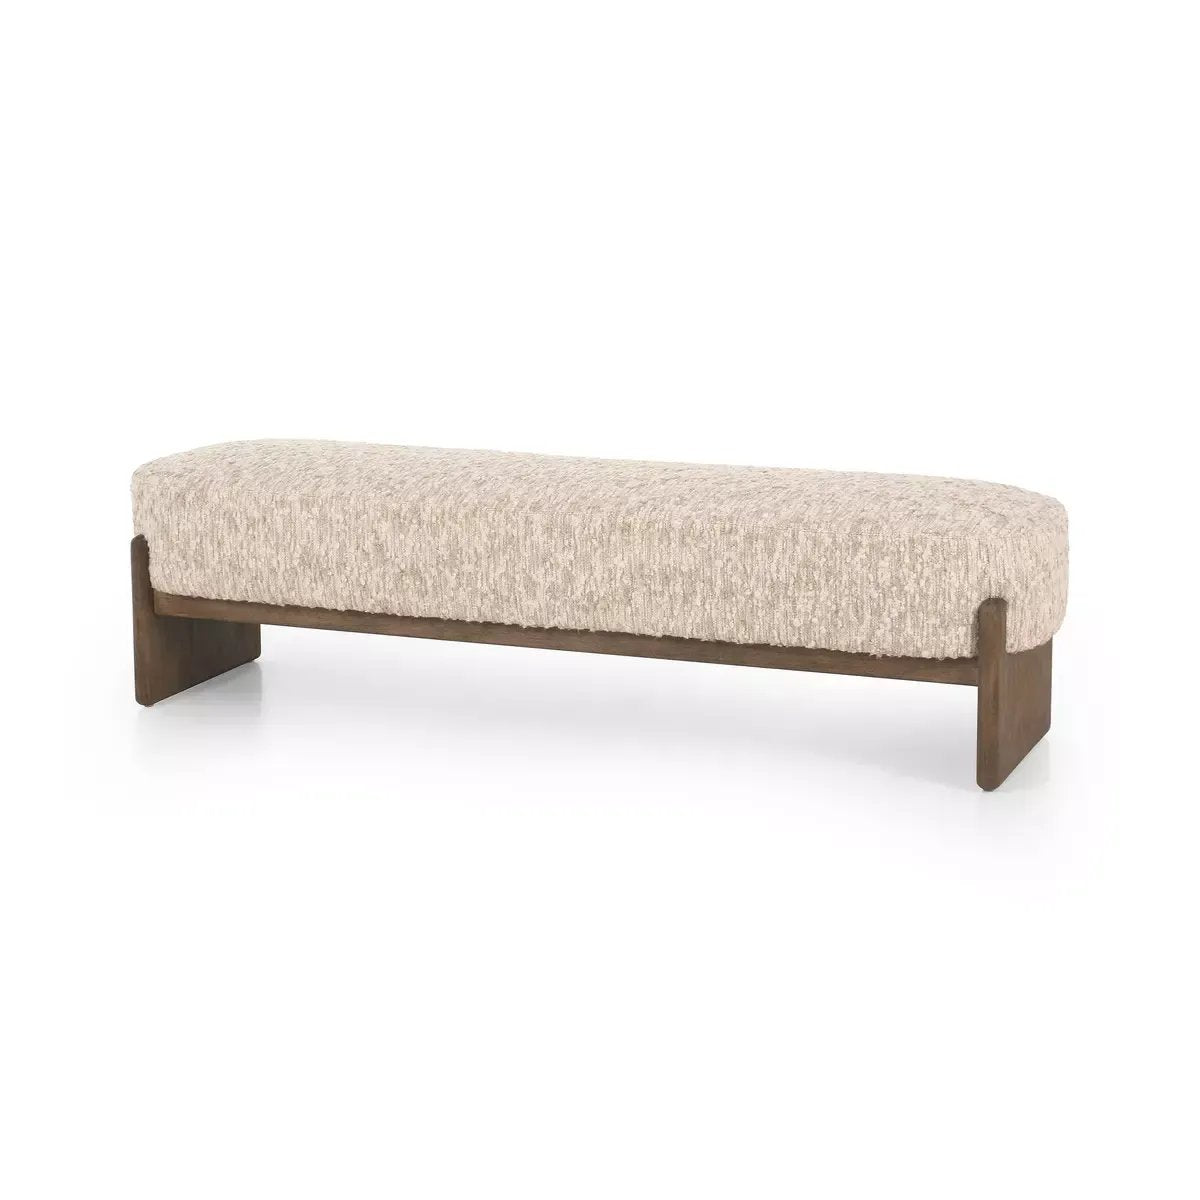 Style this modern accent bench just about anywhere. A cradle base of wire-brushed parawood supports heavily textured upholstered seating.Collection: Kensingto Amethyst Home provides interior design, new home construction design consulting, vintage area rugs, and lighting in the San Diego metro area.